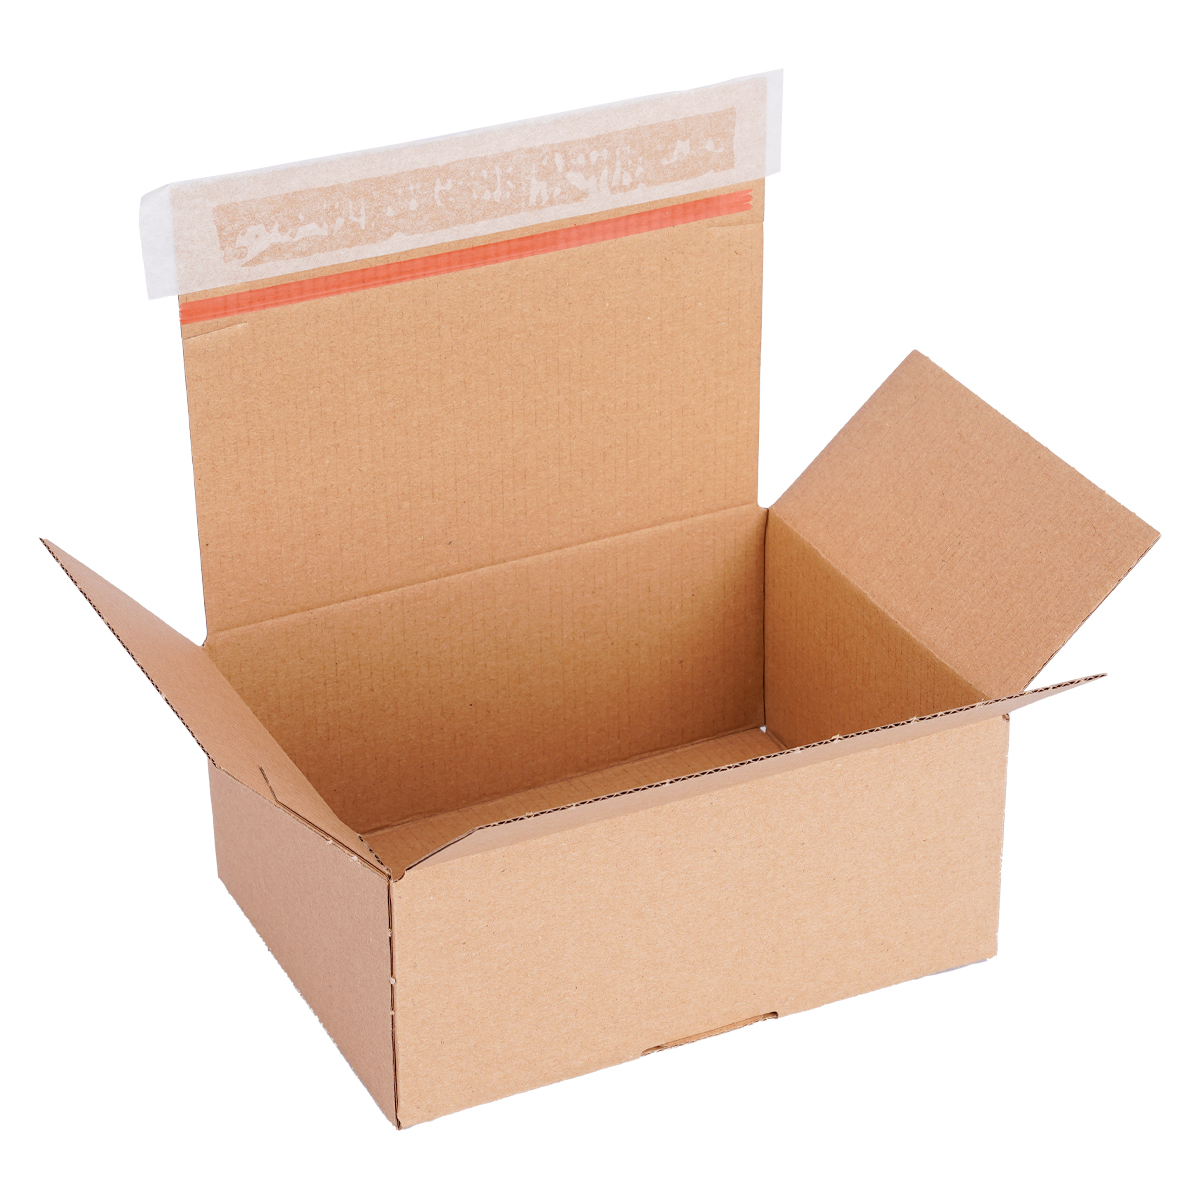 Automatic box 160x130x70 mm with self-adhesive lid - VP 10